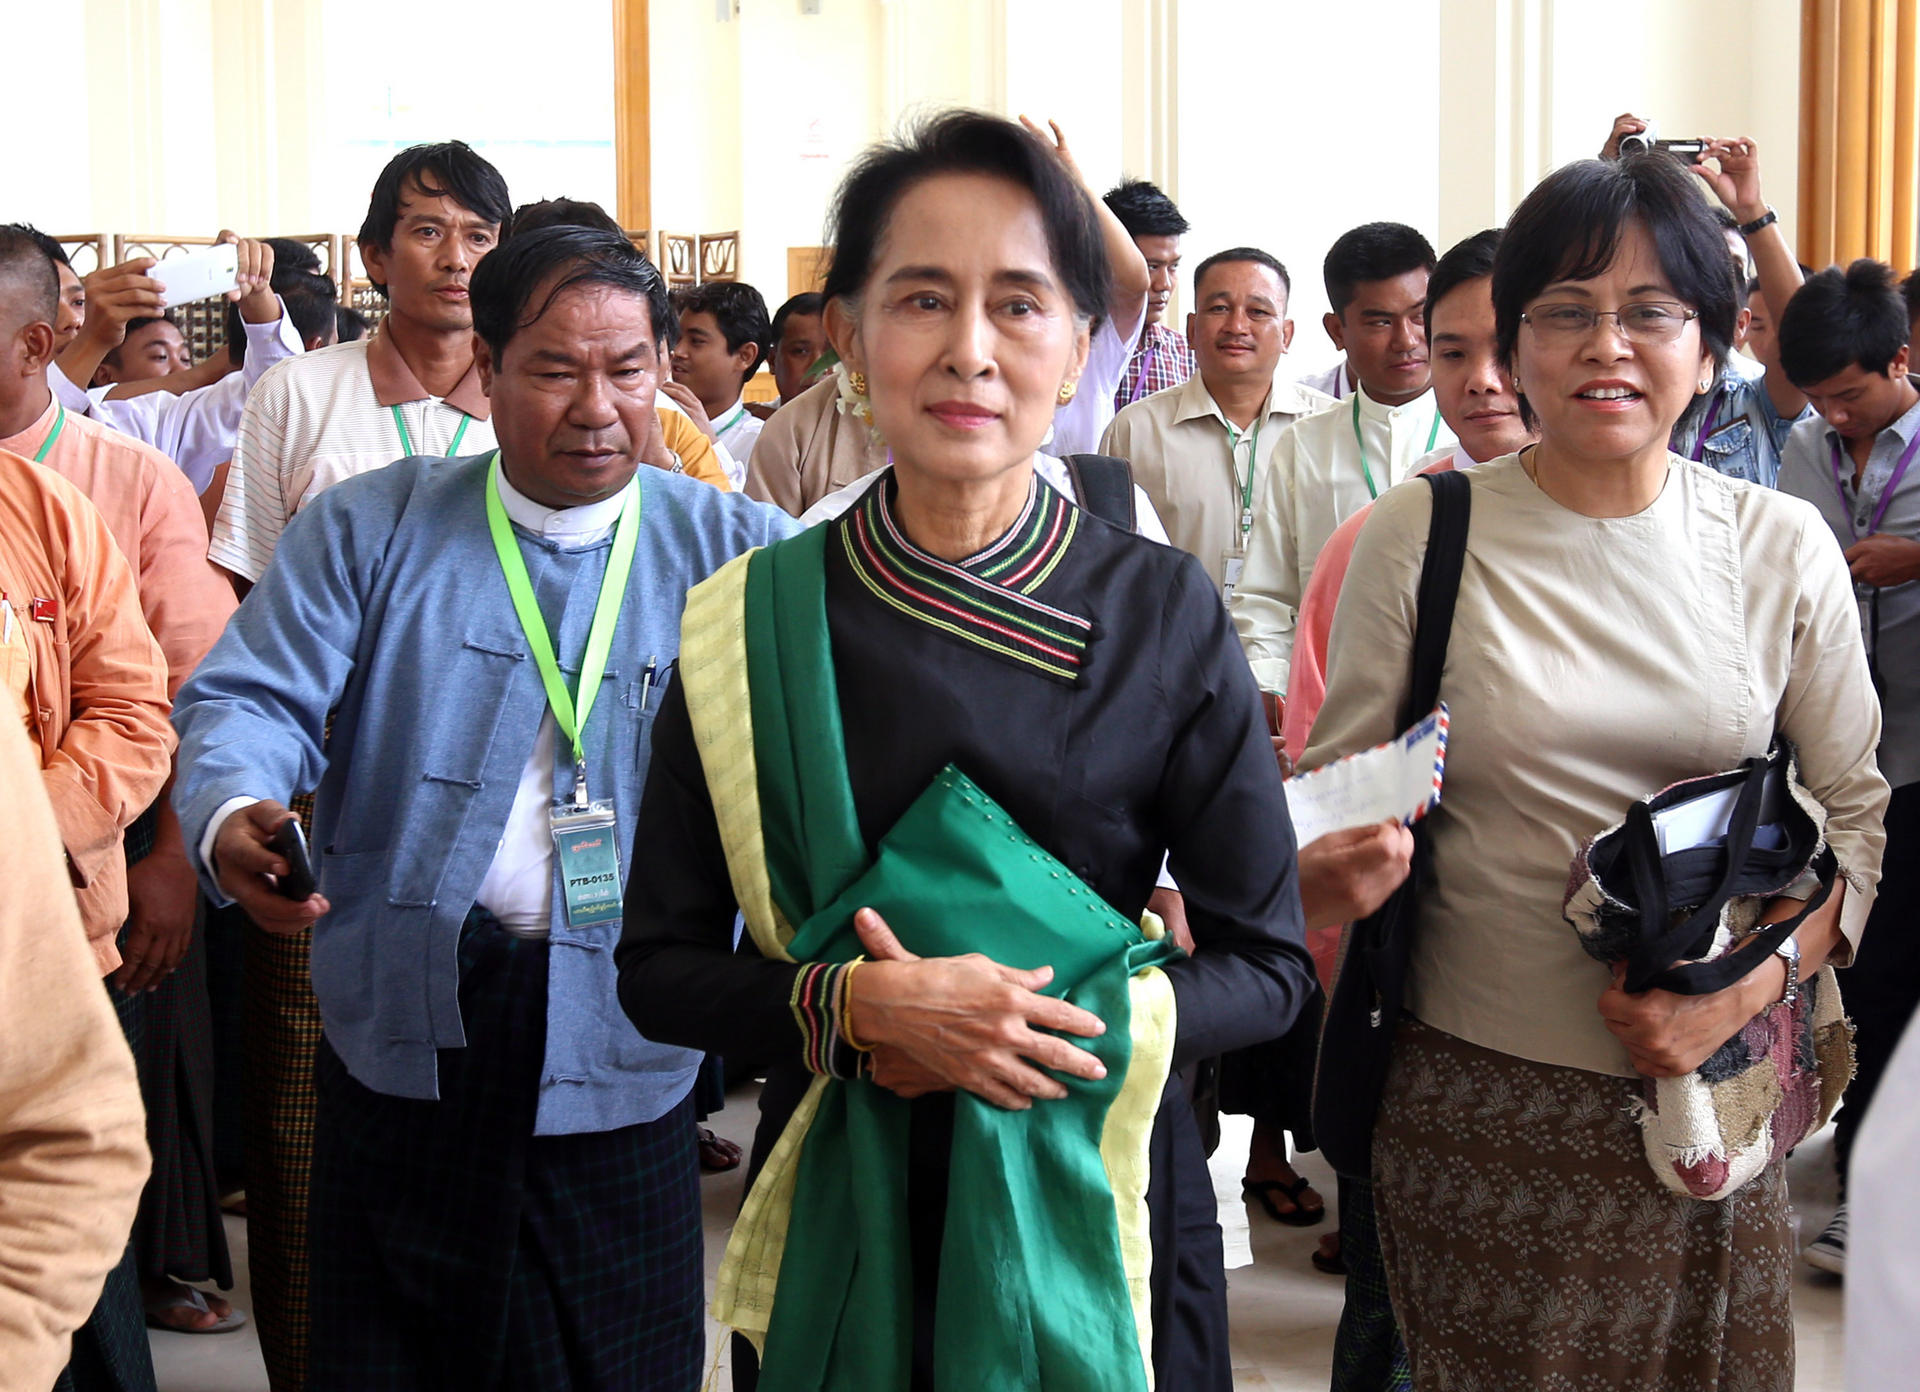 Suu Kyi's bid for the presidency is running out of time. Photo: Xinhua